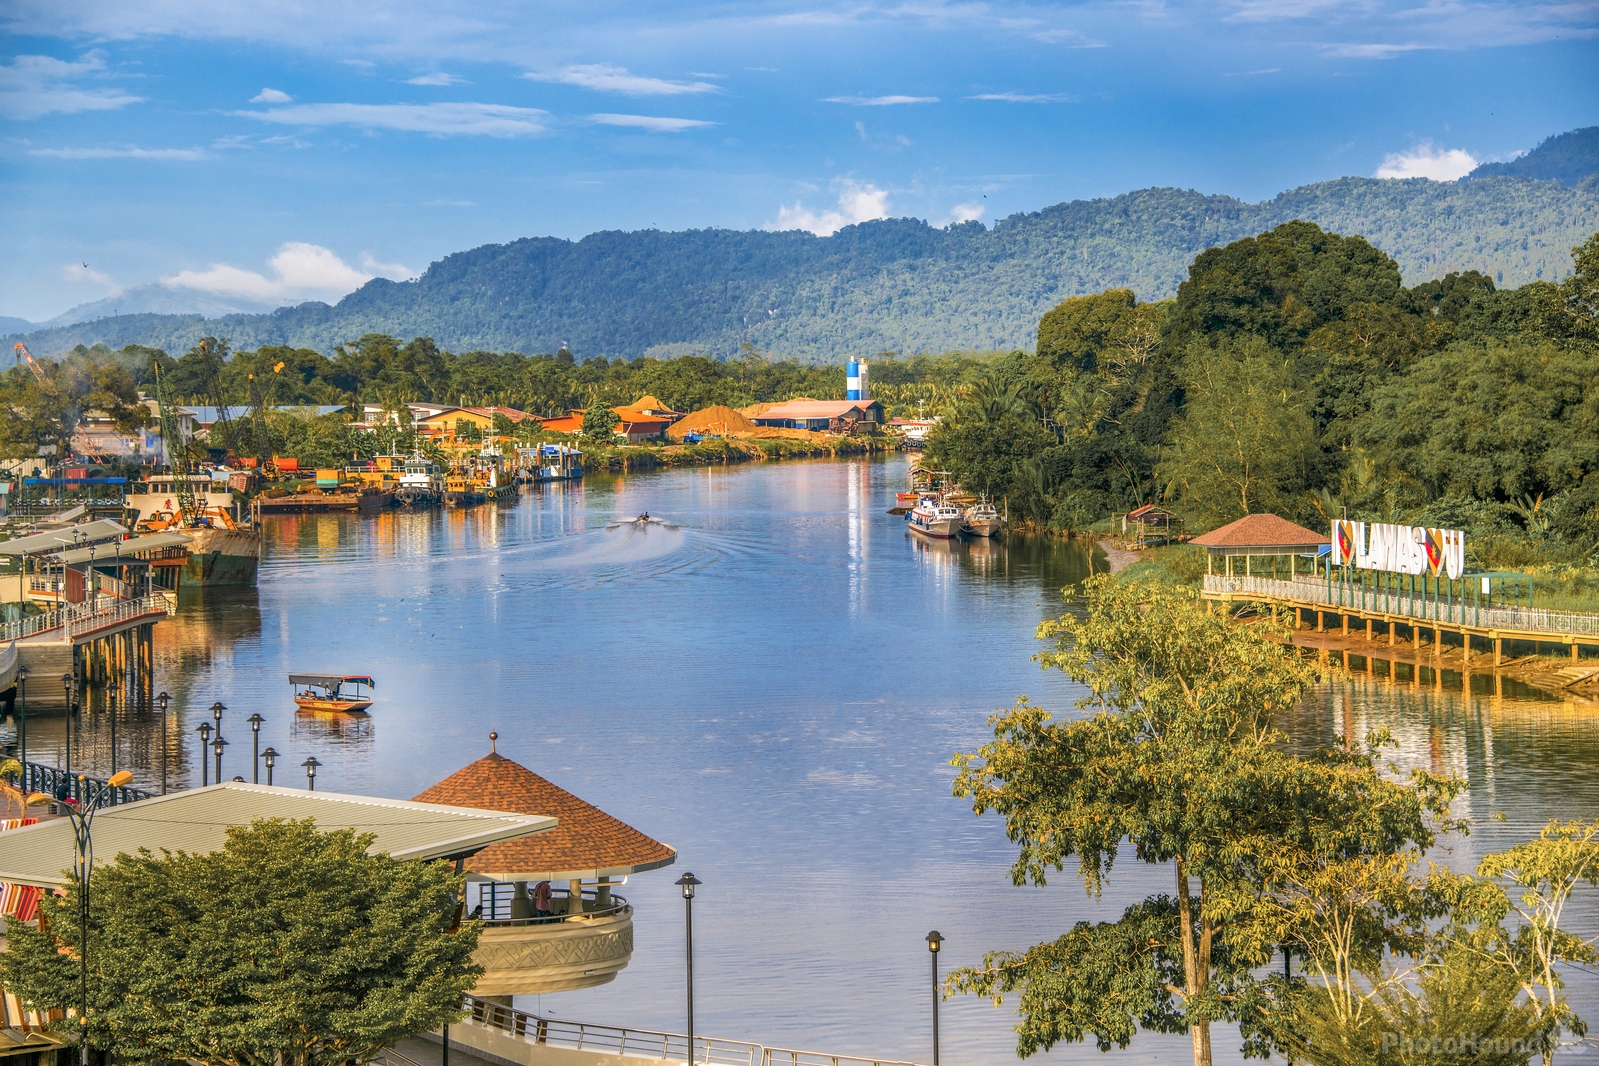 Image of Lawas Waterfront from Hotel Seri by Chavalit Likitratcharoen